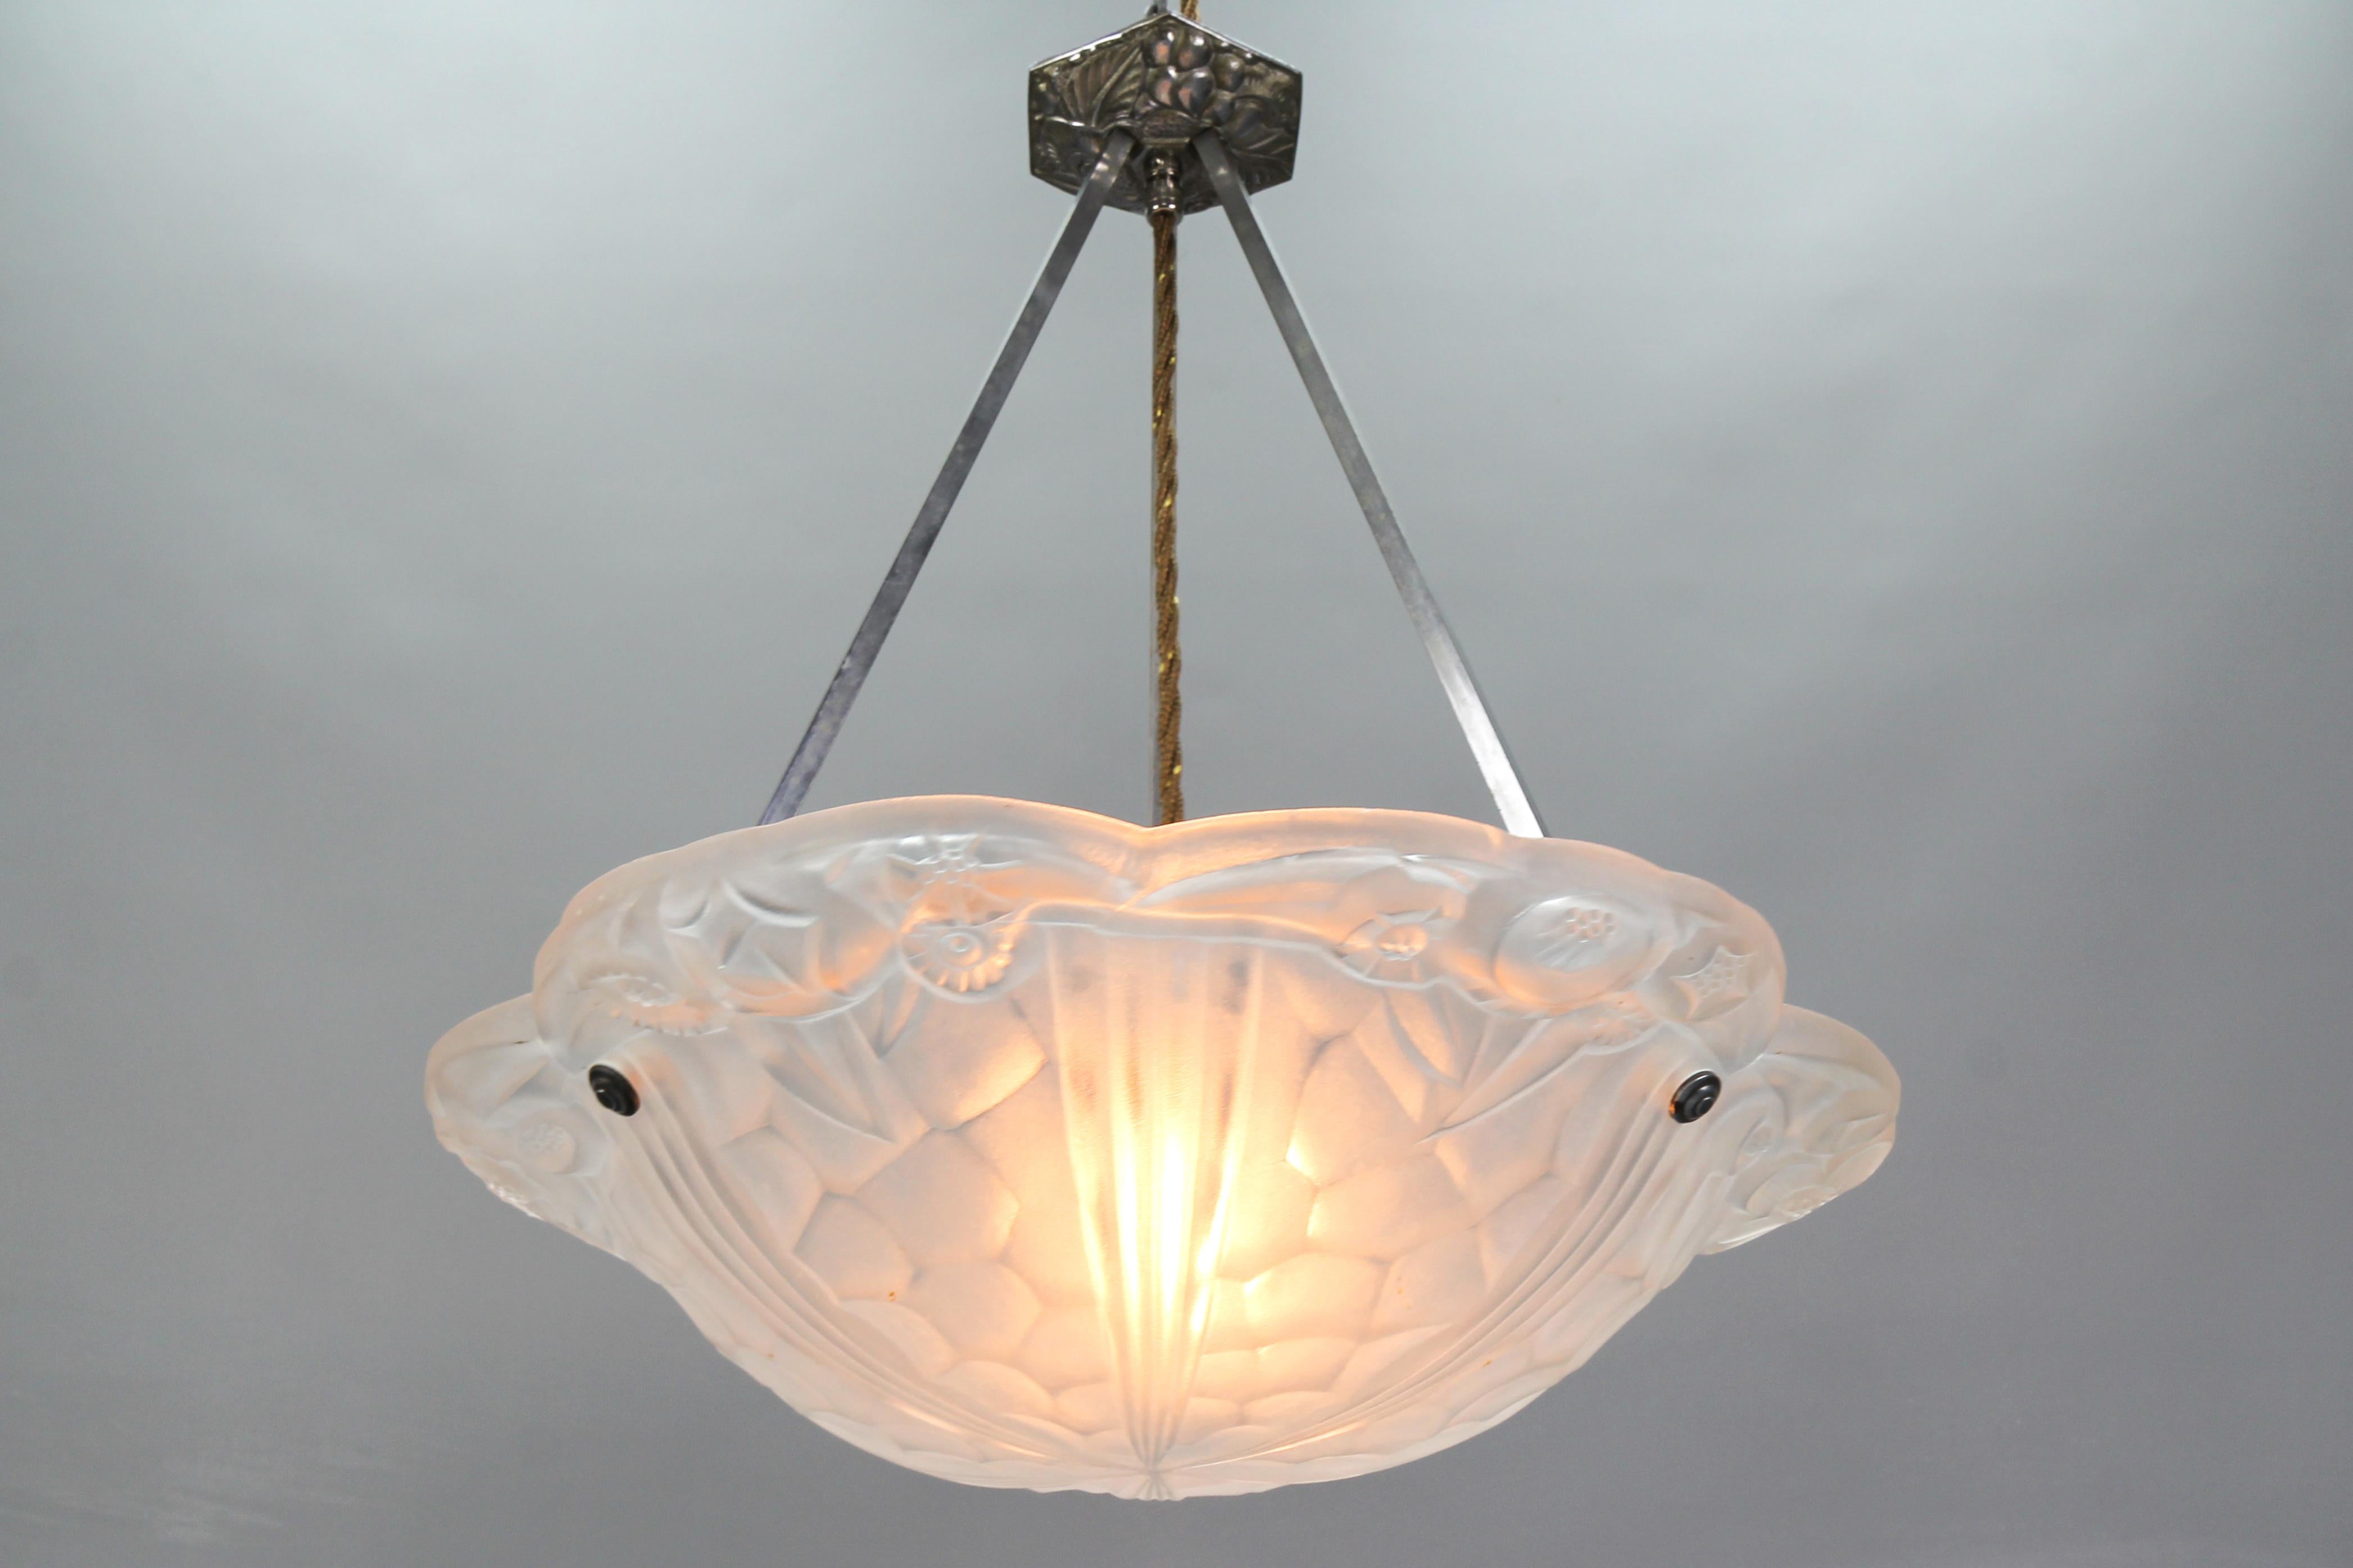 French Art Deco pendant light with white frosted glass shade signed Degué by Verrerie D'Art Degué. 
Beautifully shaped glass lampshade features a relief of stylized flower motifs, the glass surface signed 